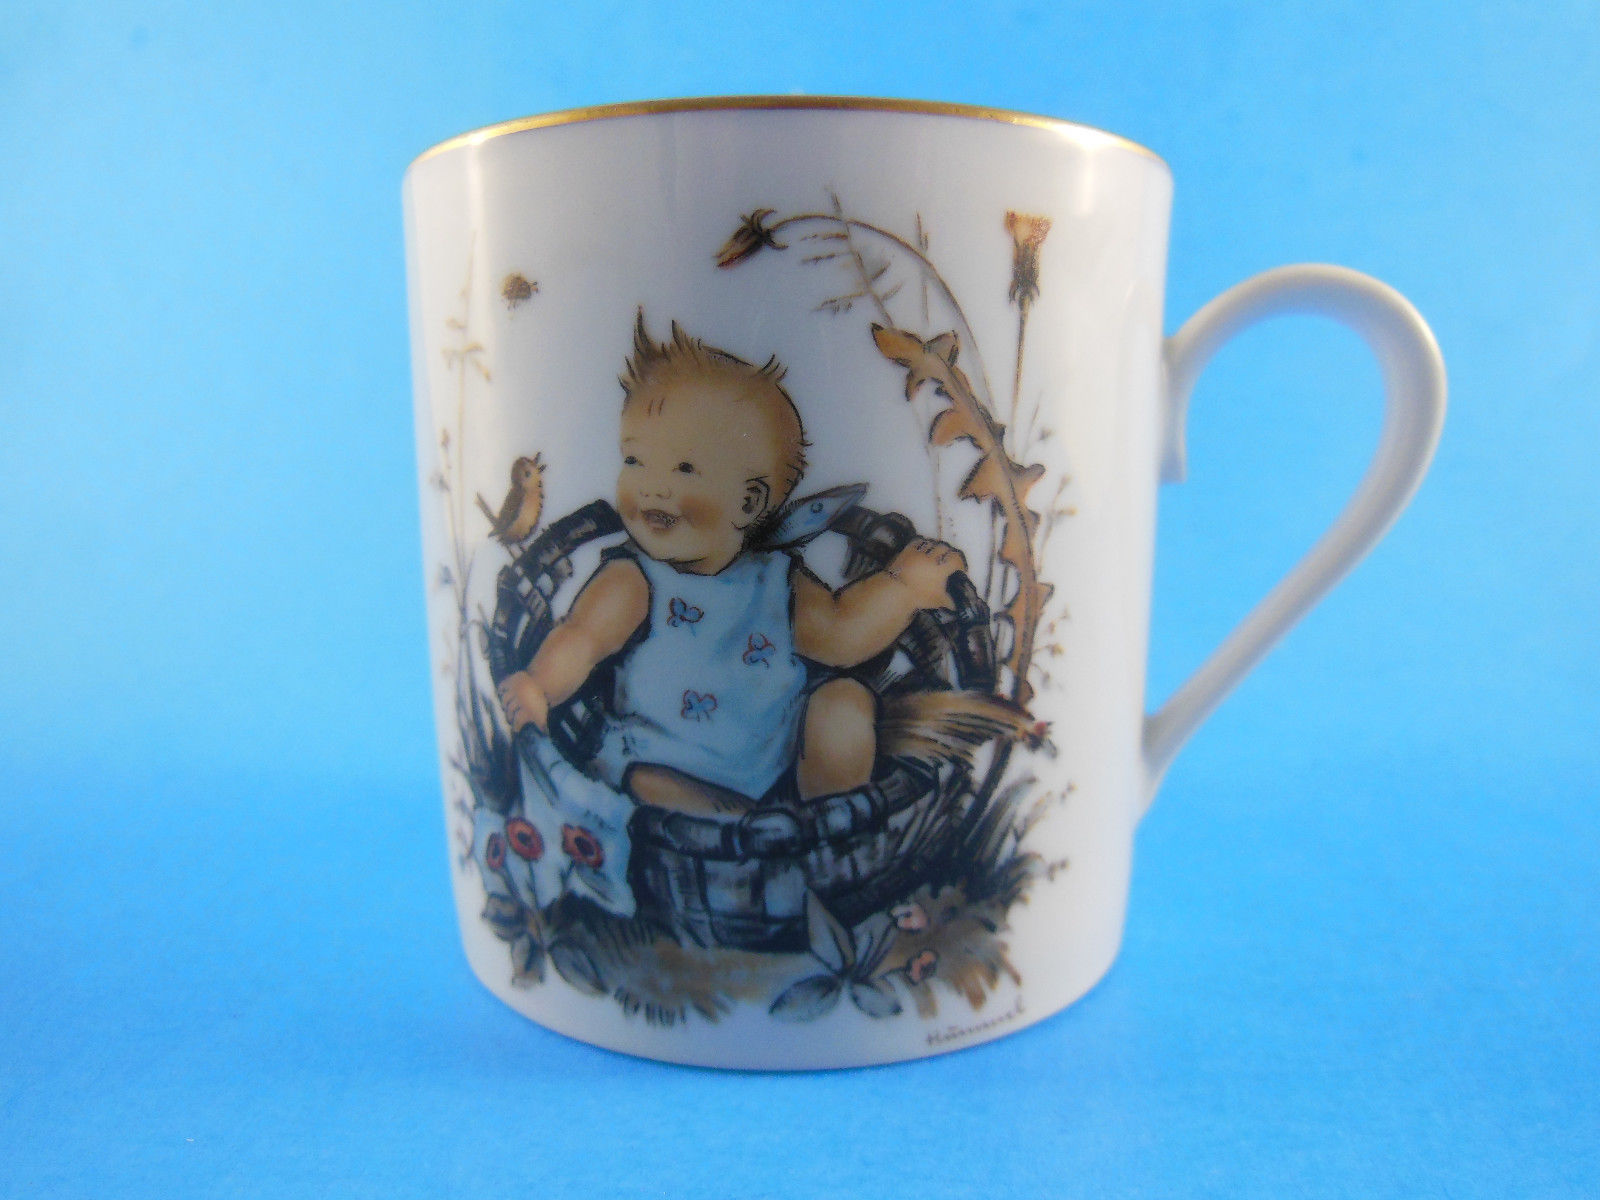 1973 HUMMEL CHILD`S CUP by SCHMID Made in West Germany 2 3/4" - $8.31